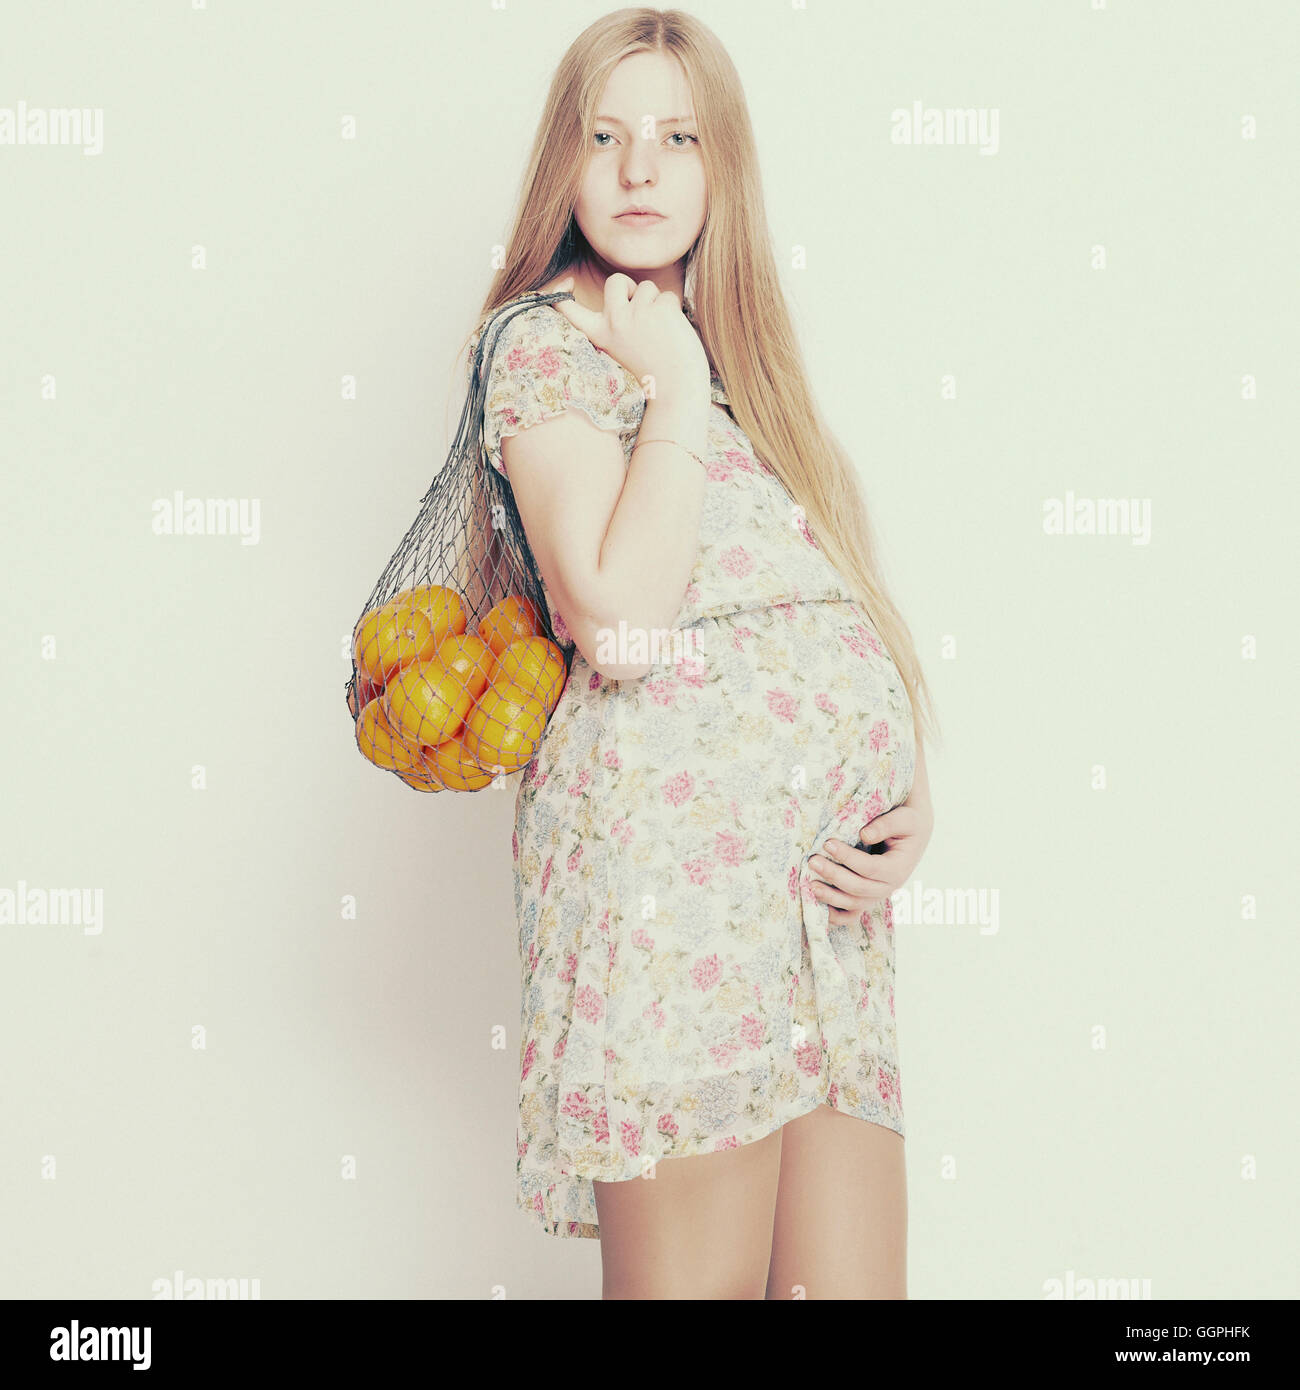 Pregnant woman carrying bag of fruit Stock Photo